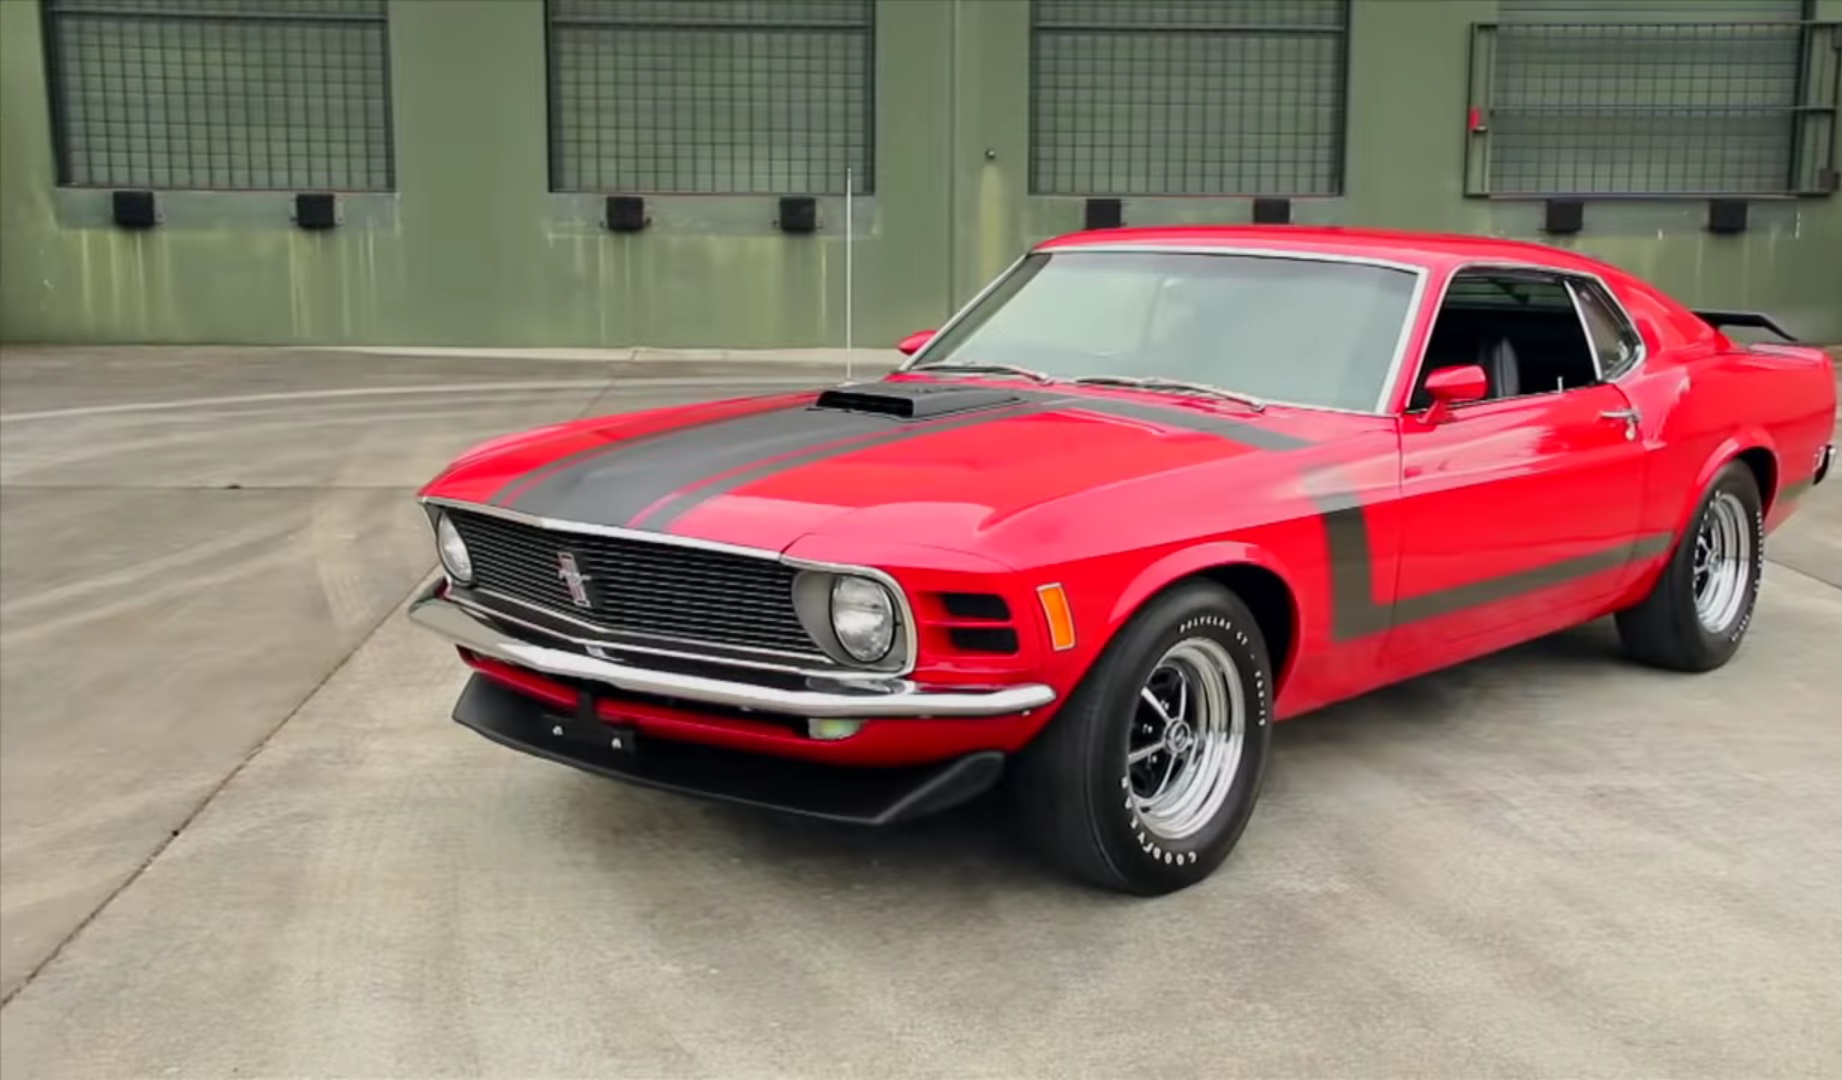 Video: 1970 Ford Mustang Boss 302 Muscle Car